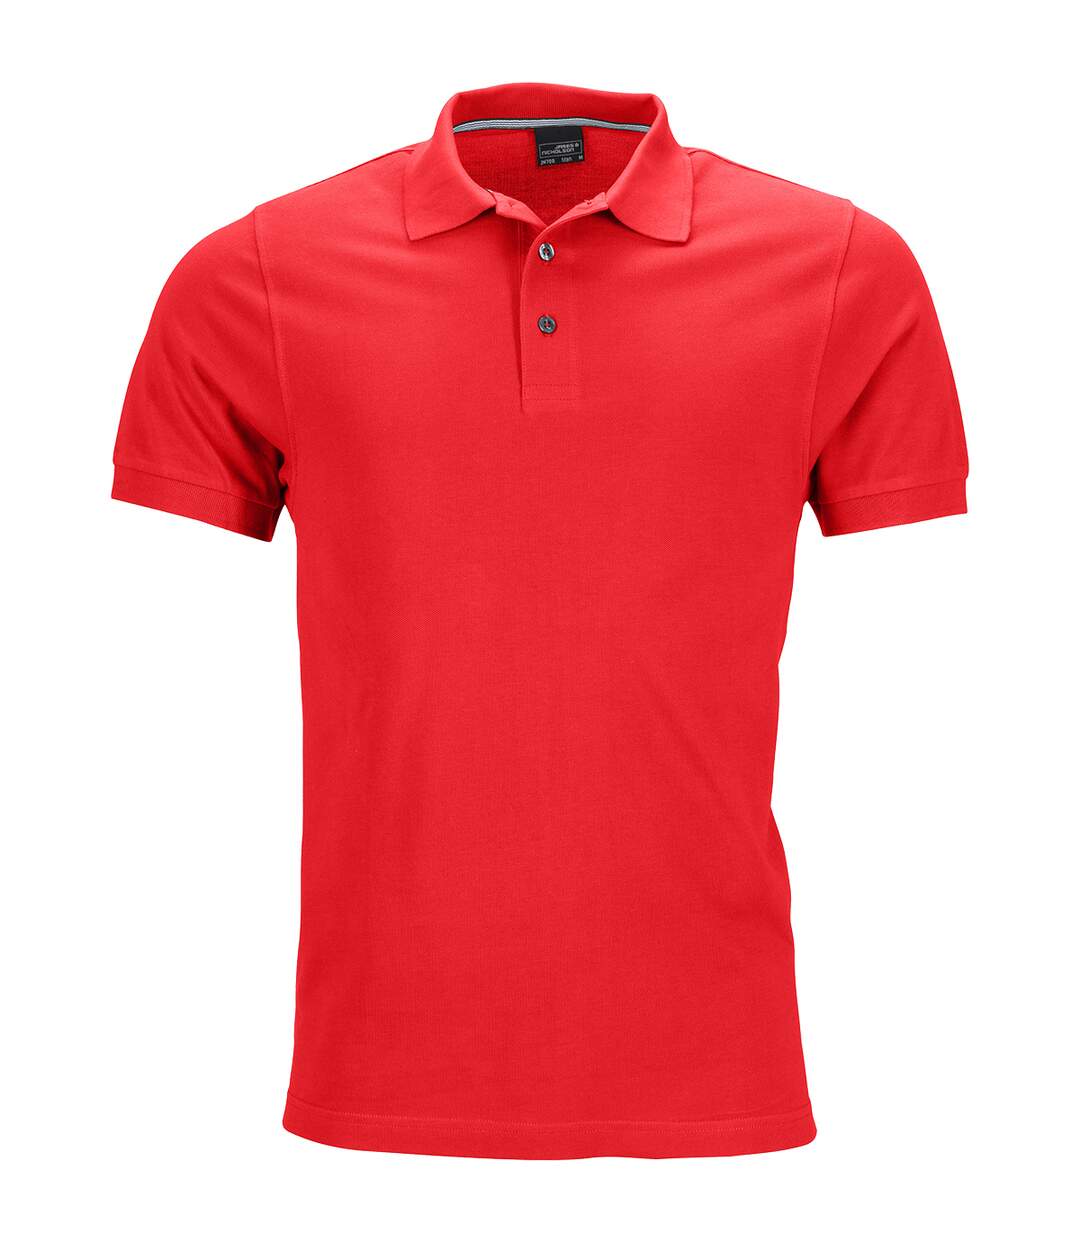 Polo homme manches courtes JN708 - rouge clair